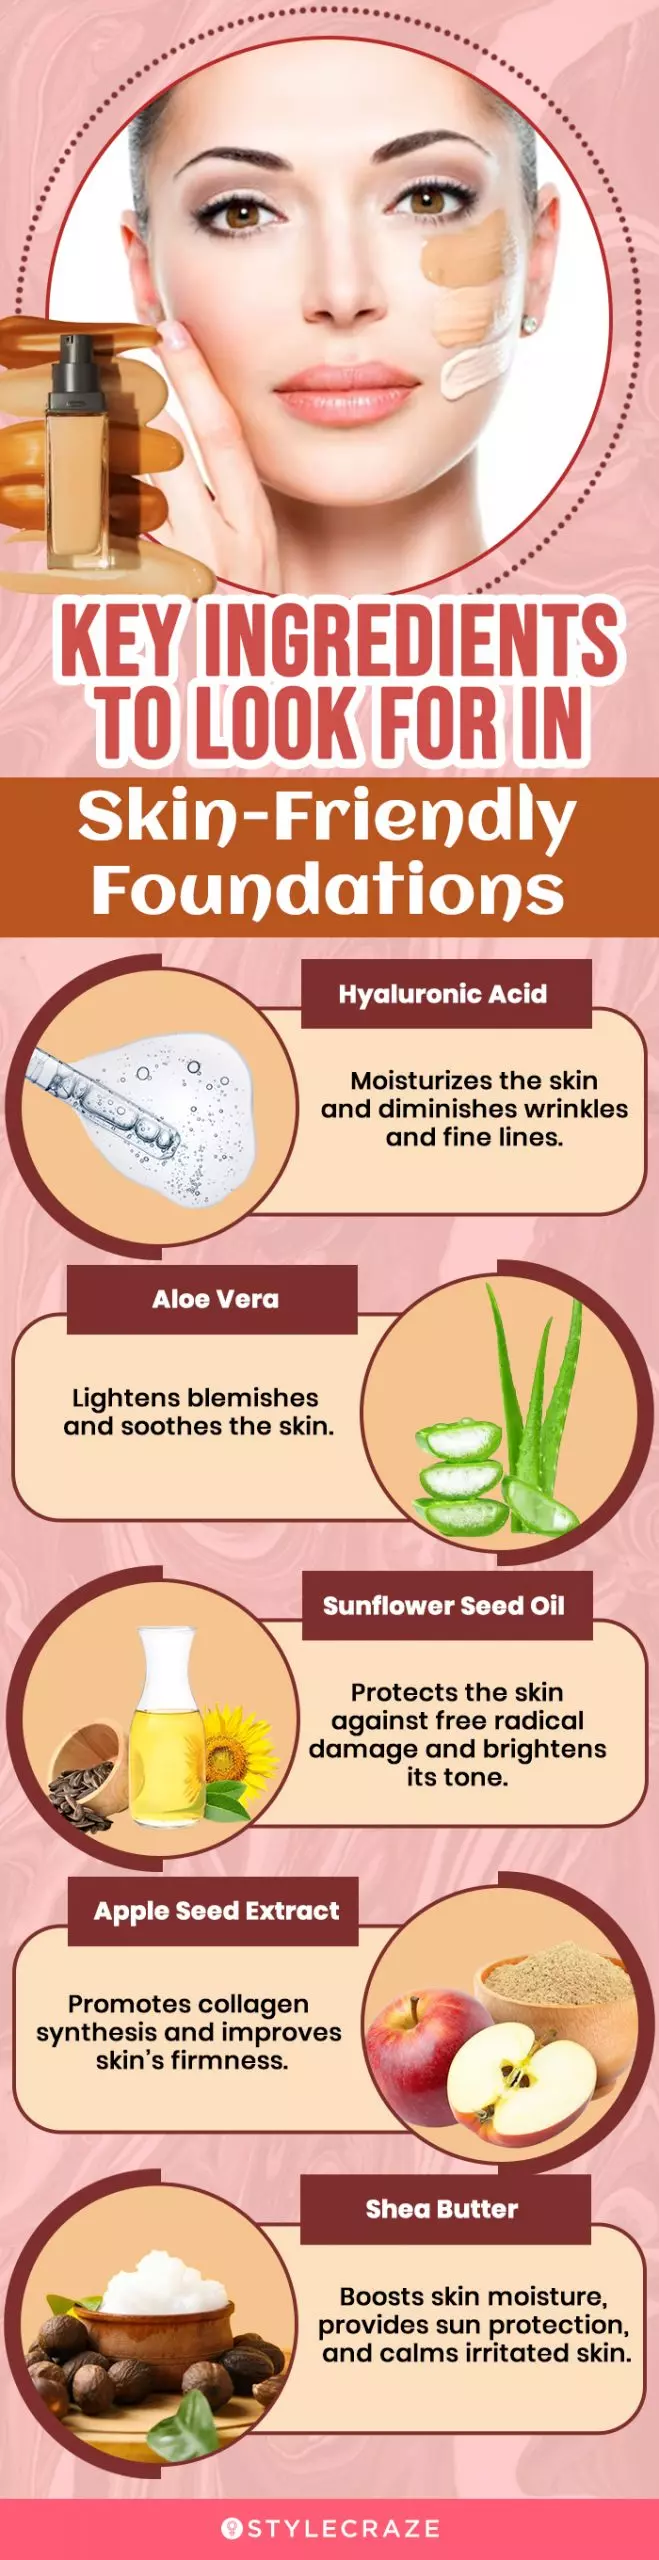  Ingredients To Look For In Skin-Friendly Foundations (infographic)